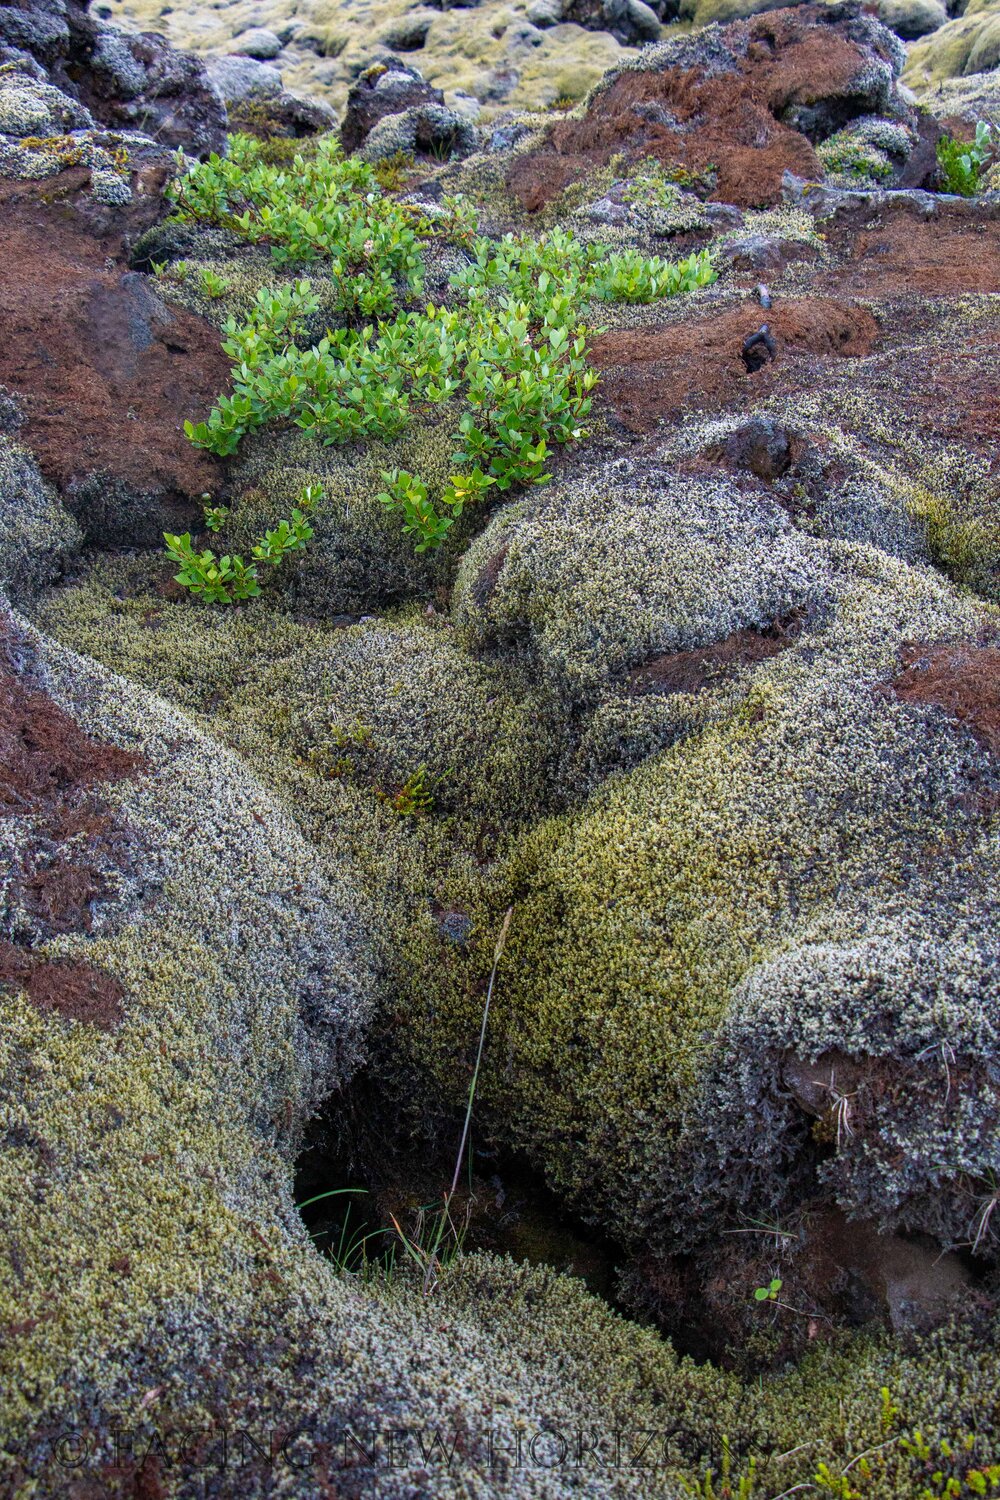  Getting close to the detail of the moss on the lava rocks 